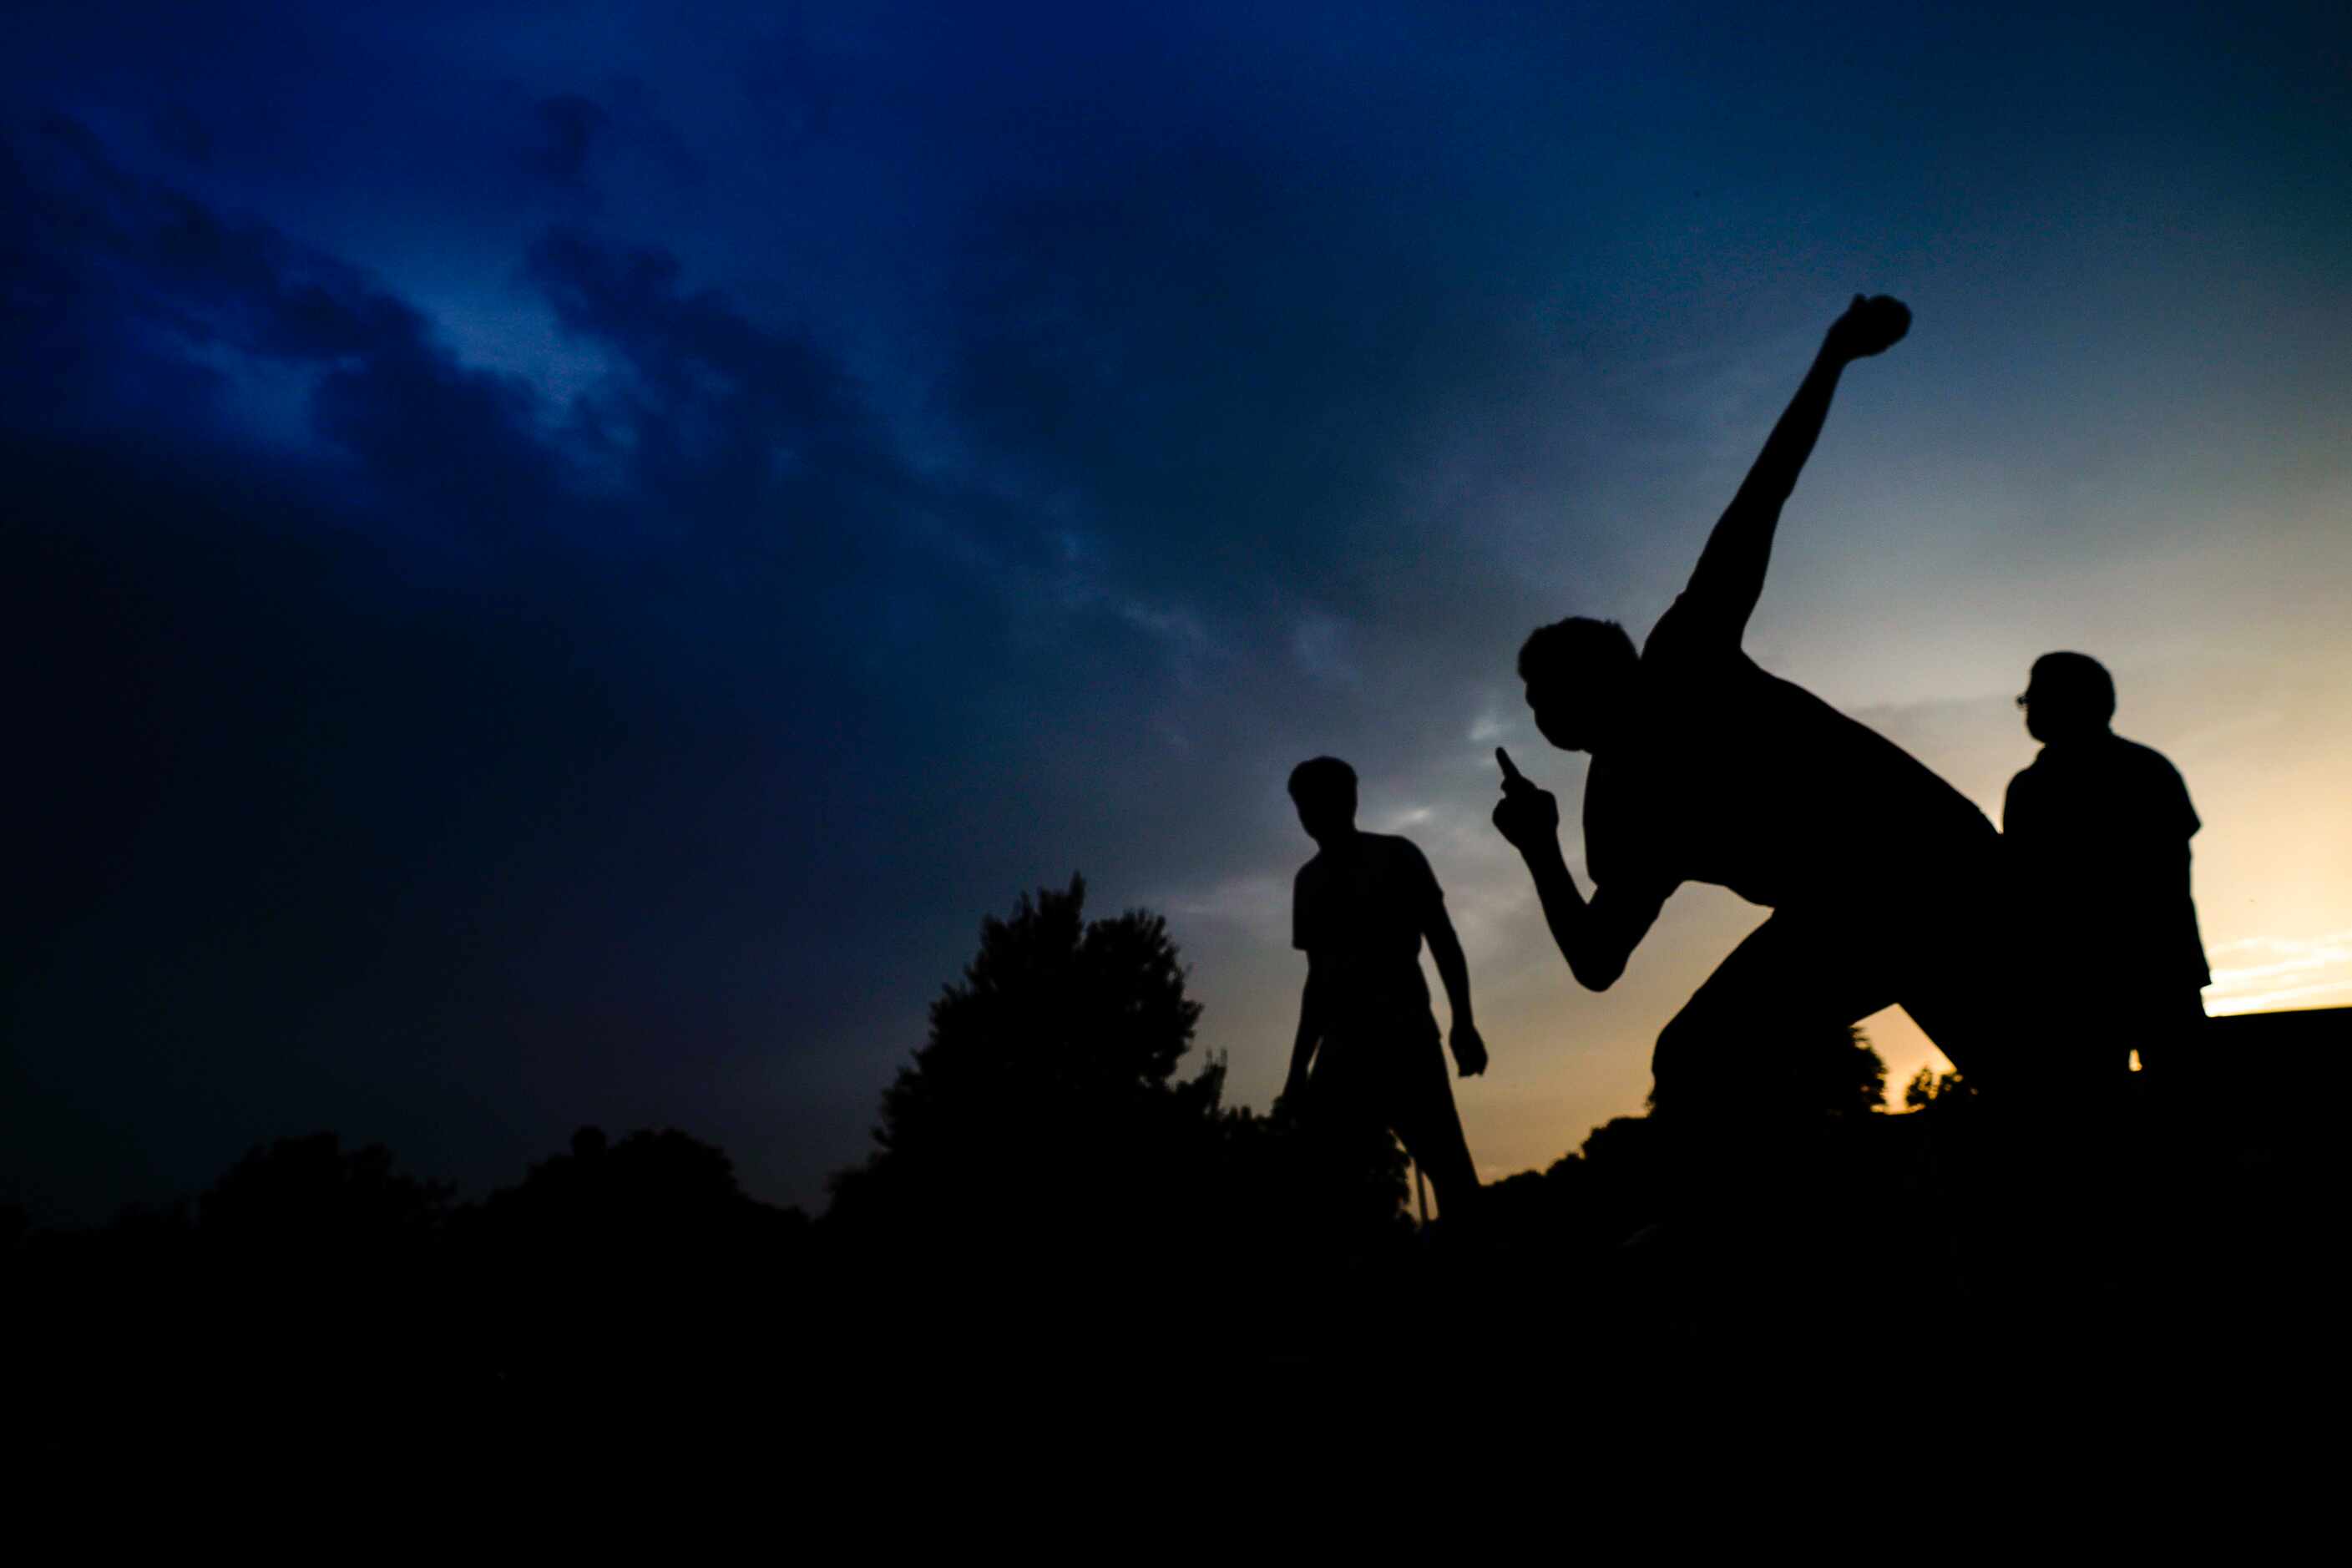 Sinjith Varma is silhouetted against the sunset as he bowls ruing a pickup cricket match on...